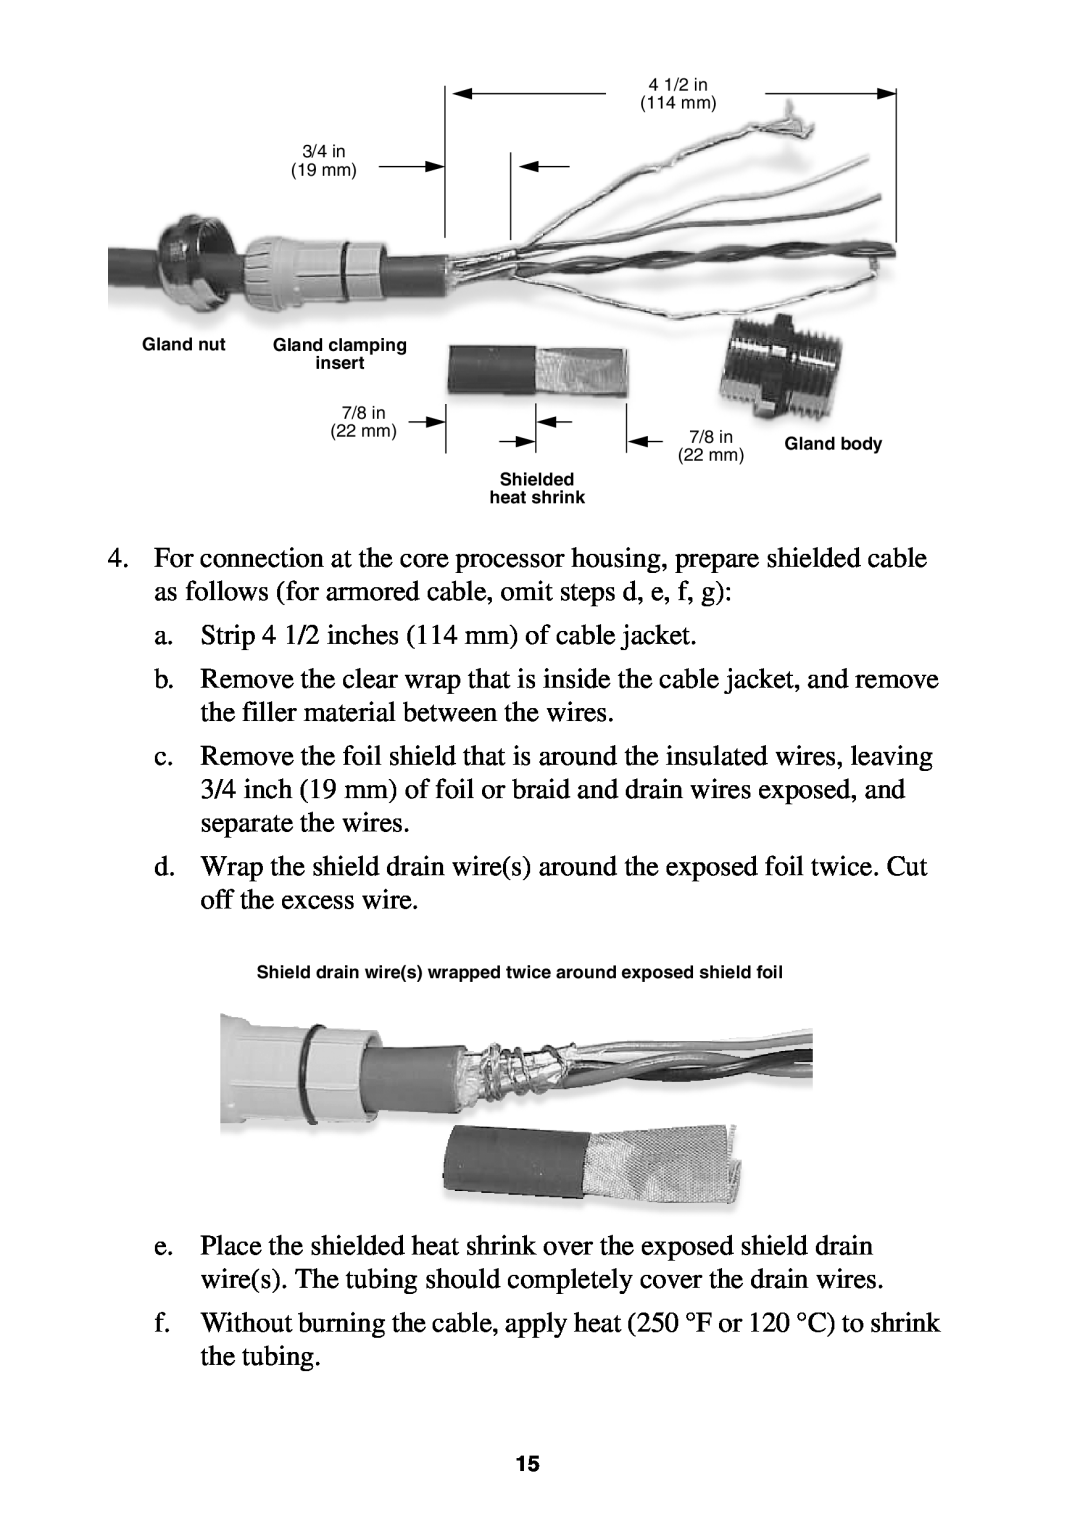 Emerson 3700, 3350 installation instructions a.Strip 4 1/2 inches 114 mm of cable jacket 